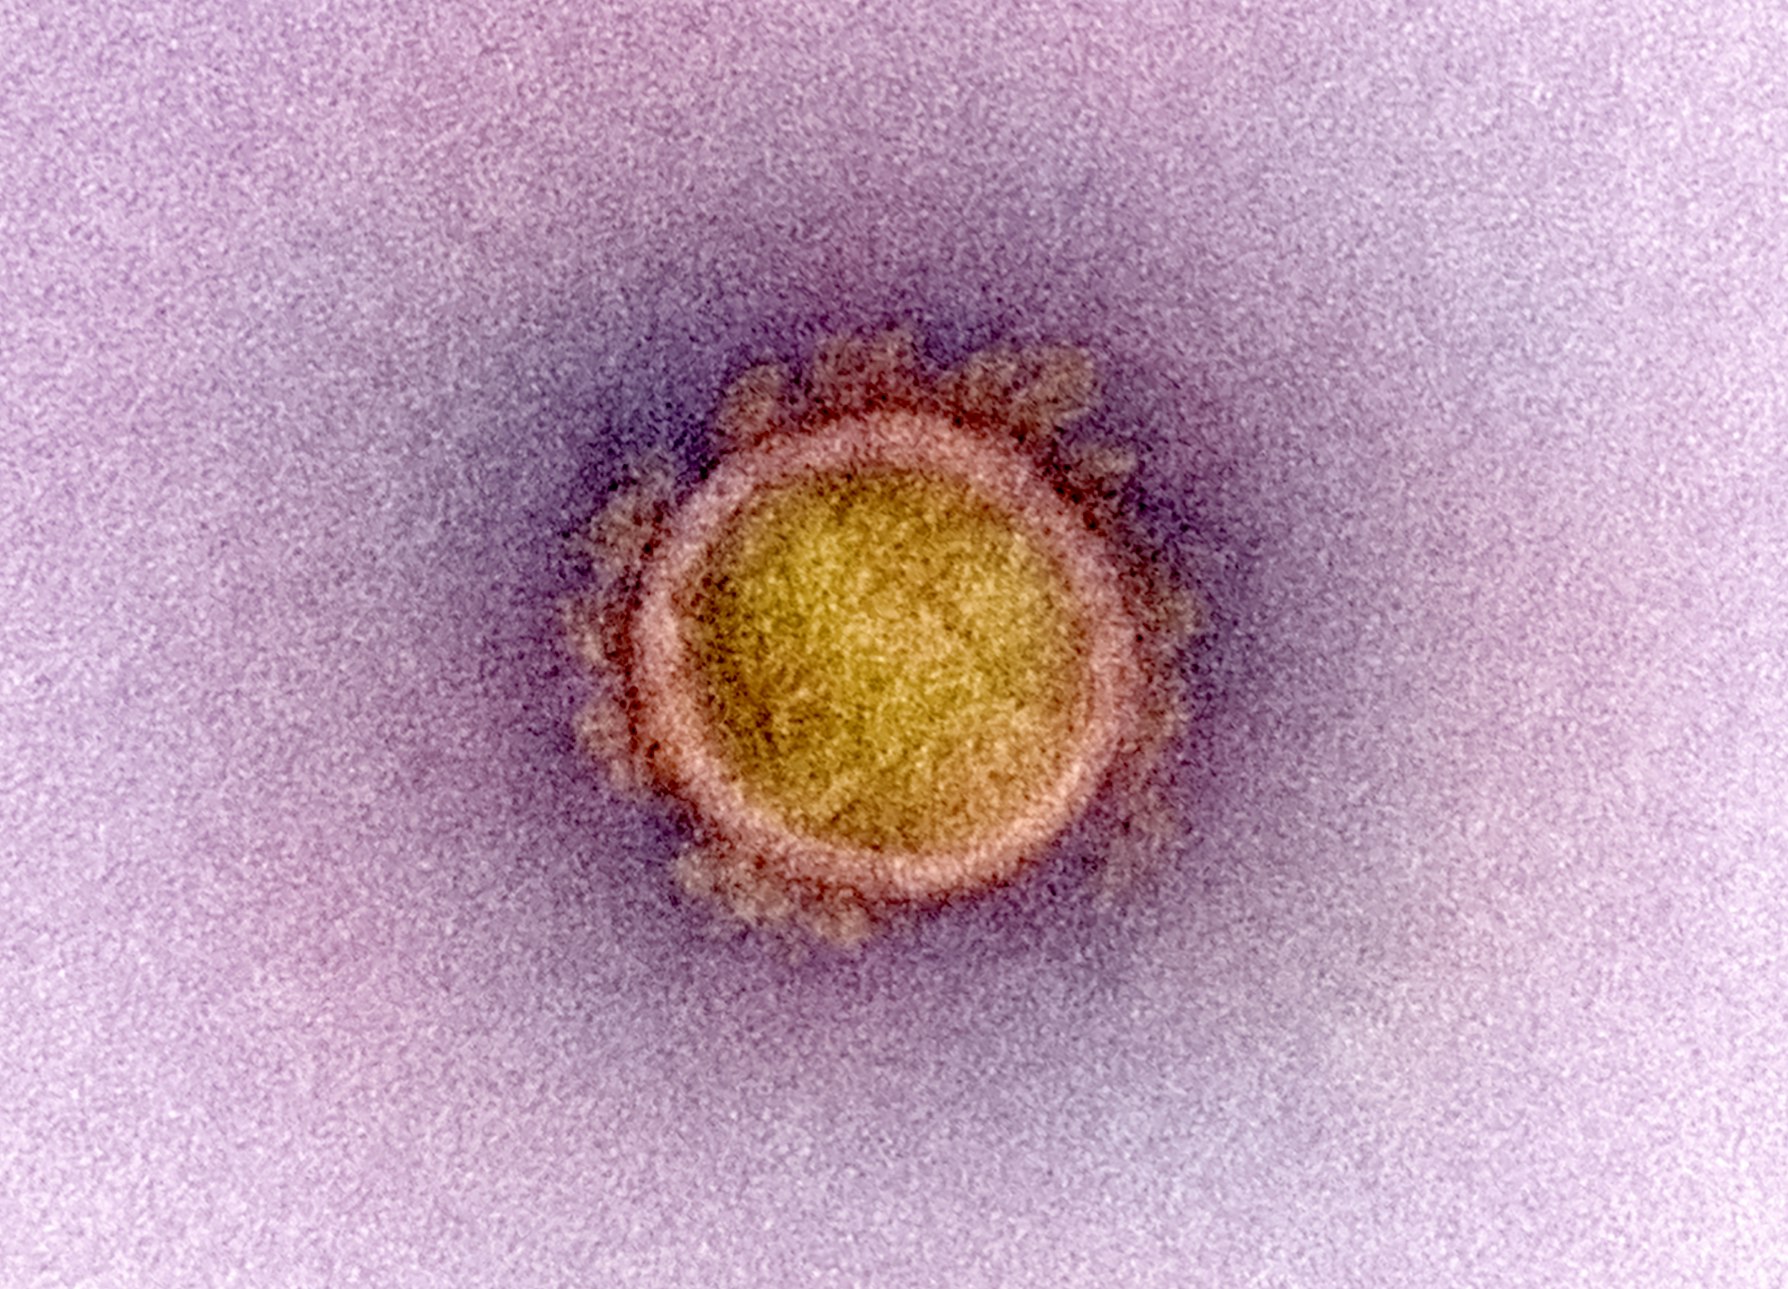 A single coronavirus particle, false colored yellow with a pink membrane, surrounded by "crown" proteins.